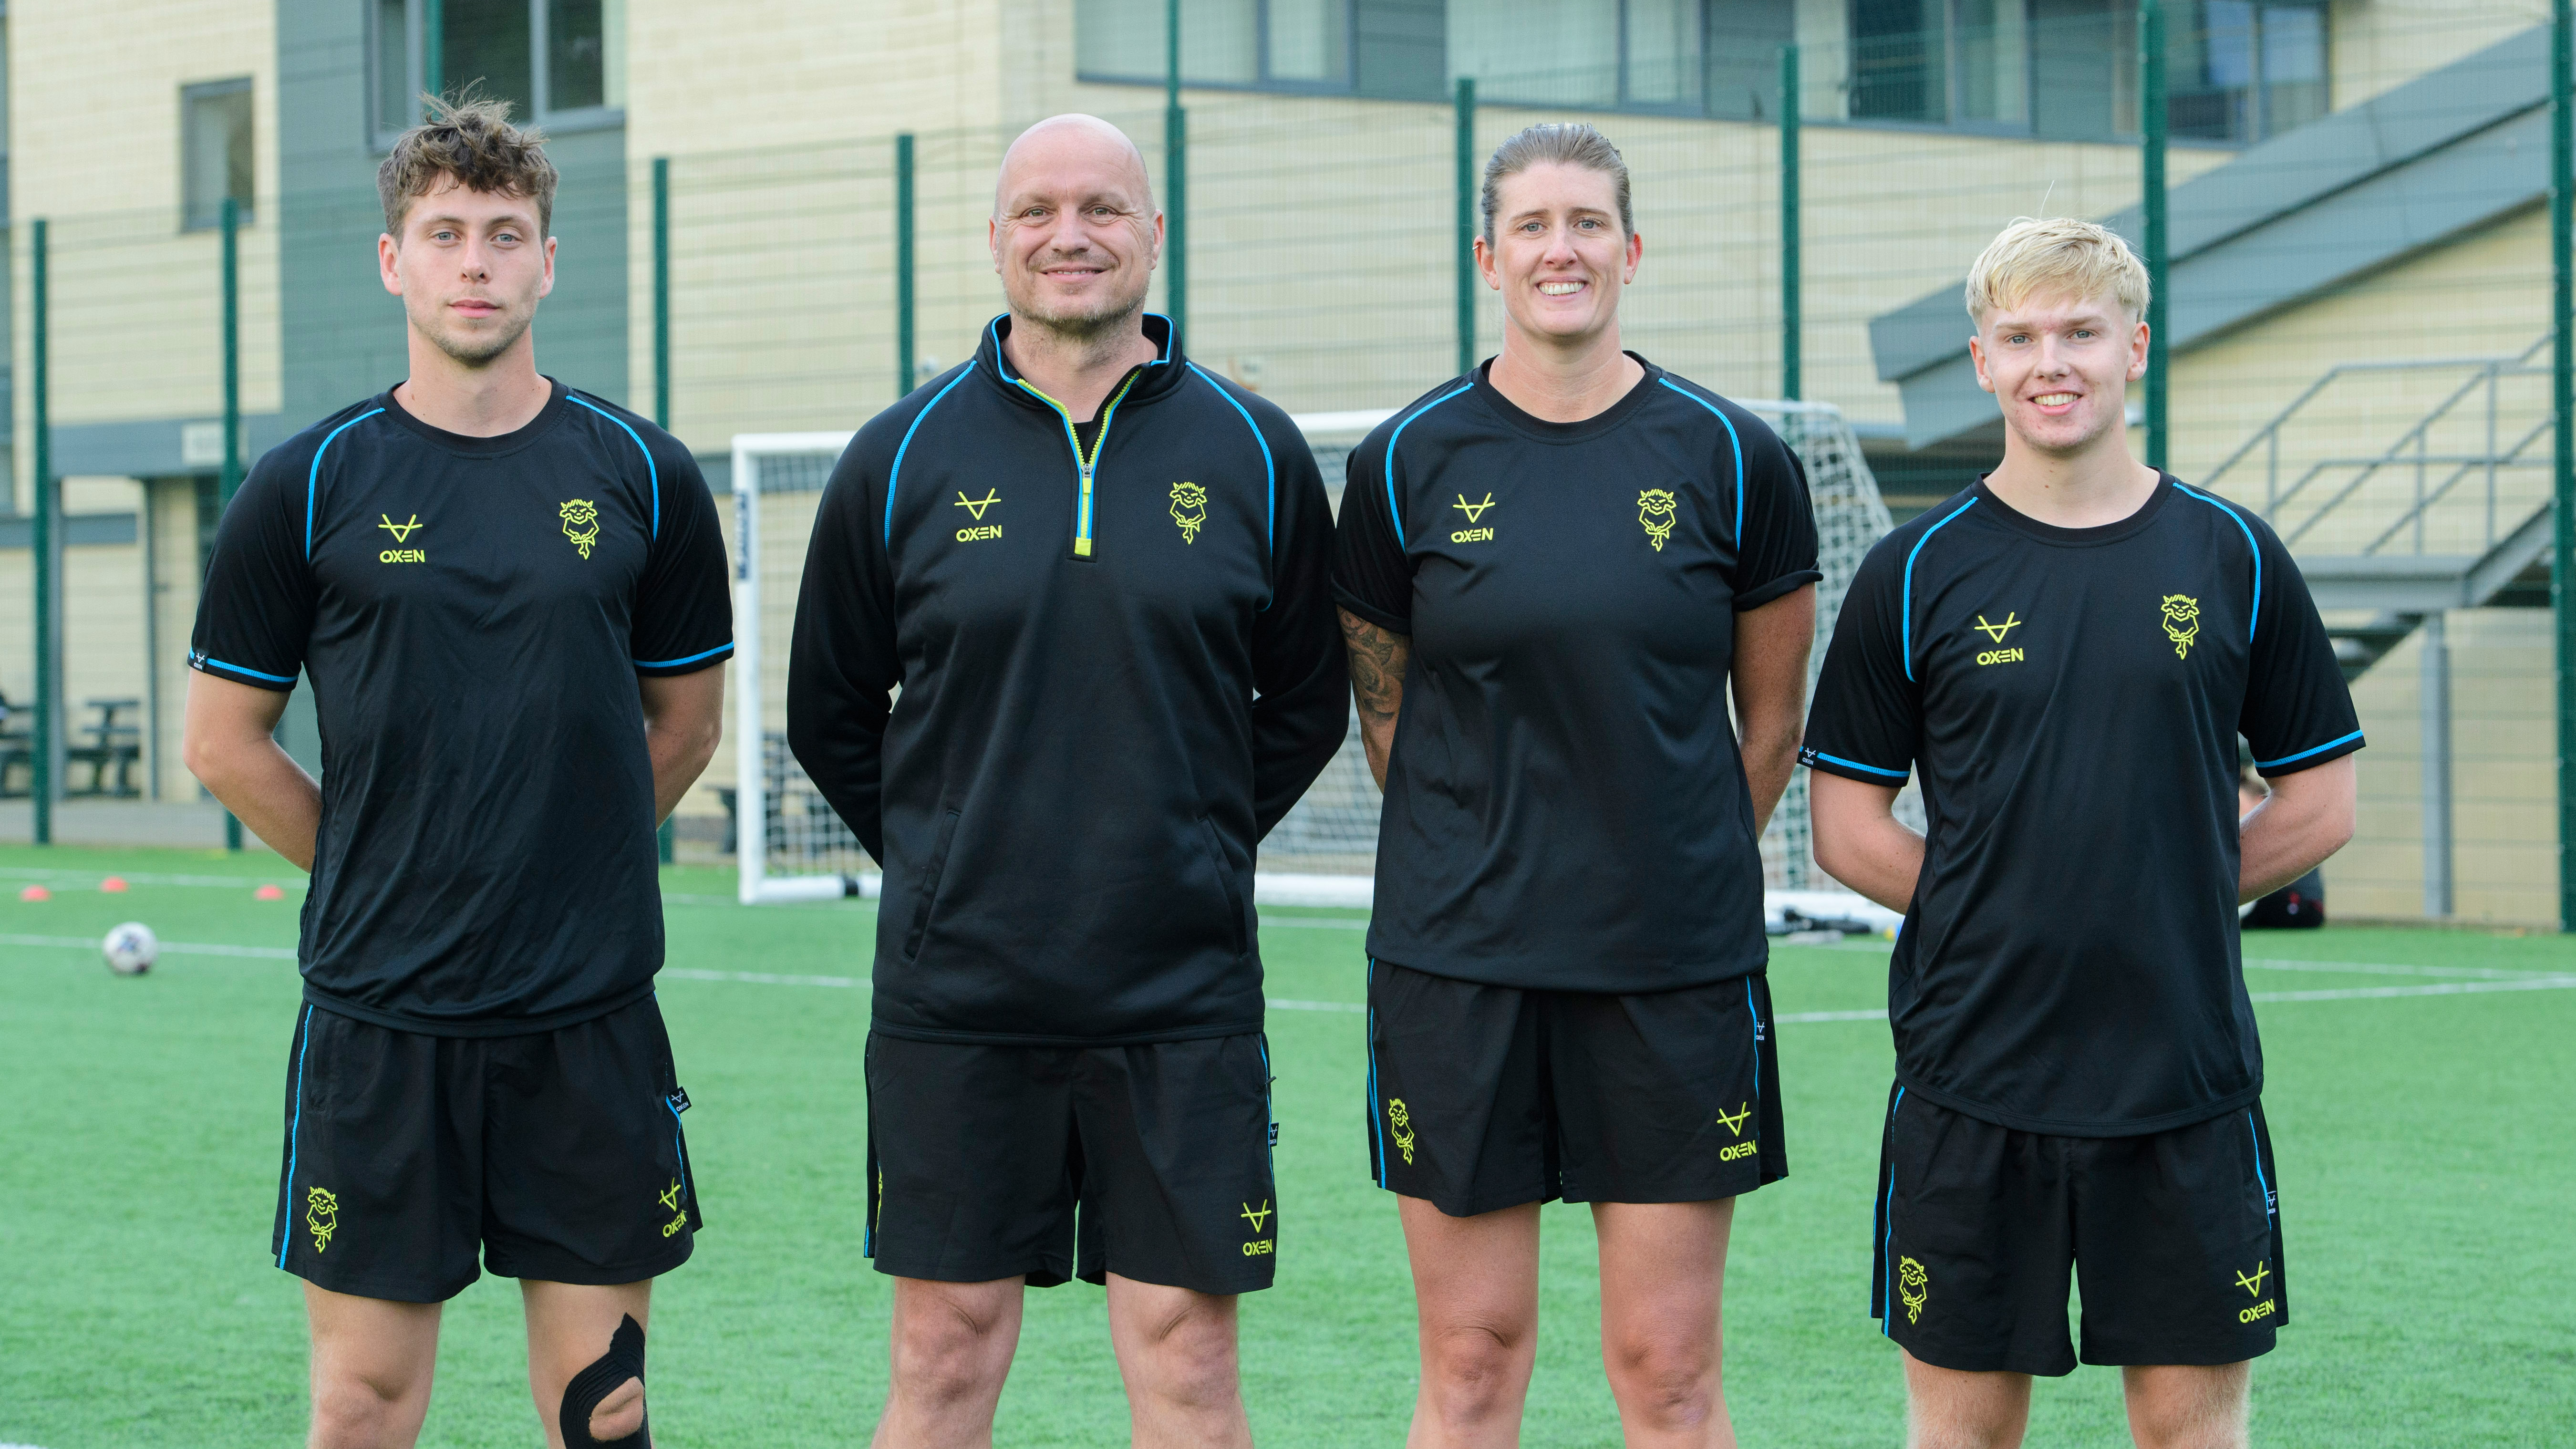 Four members of Lincoln City Women coach staff pose in front of a football pitch. They are all wearing black training kit. 